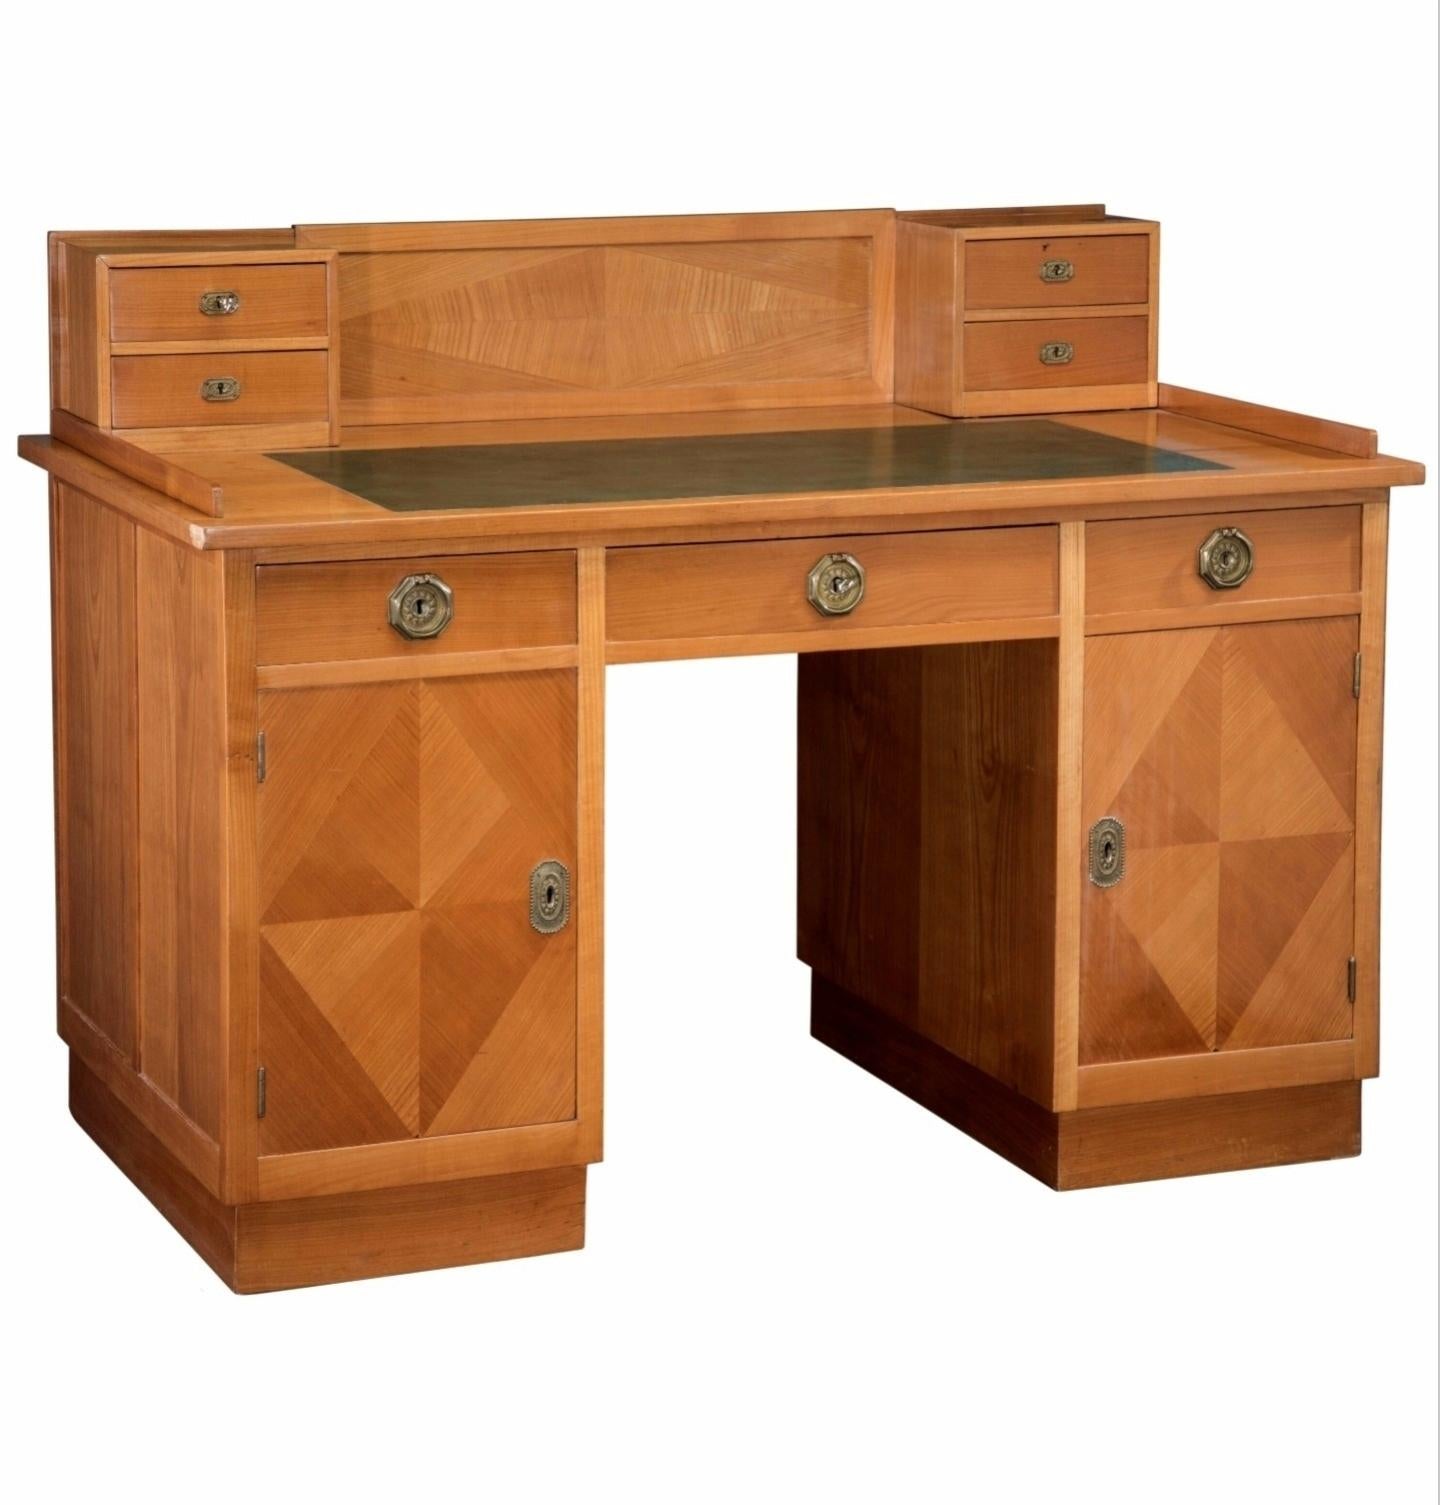 A rare Art Deco period eight-piece study suite set in the manner of famous Austrian architect, designer, and Vienna Secession founder Josef Hoffman (Austria, 1870-1956), circa 1920.

Exquisitely handcrafted in Austria in the early 20th century,